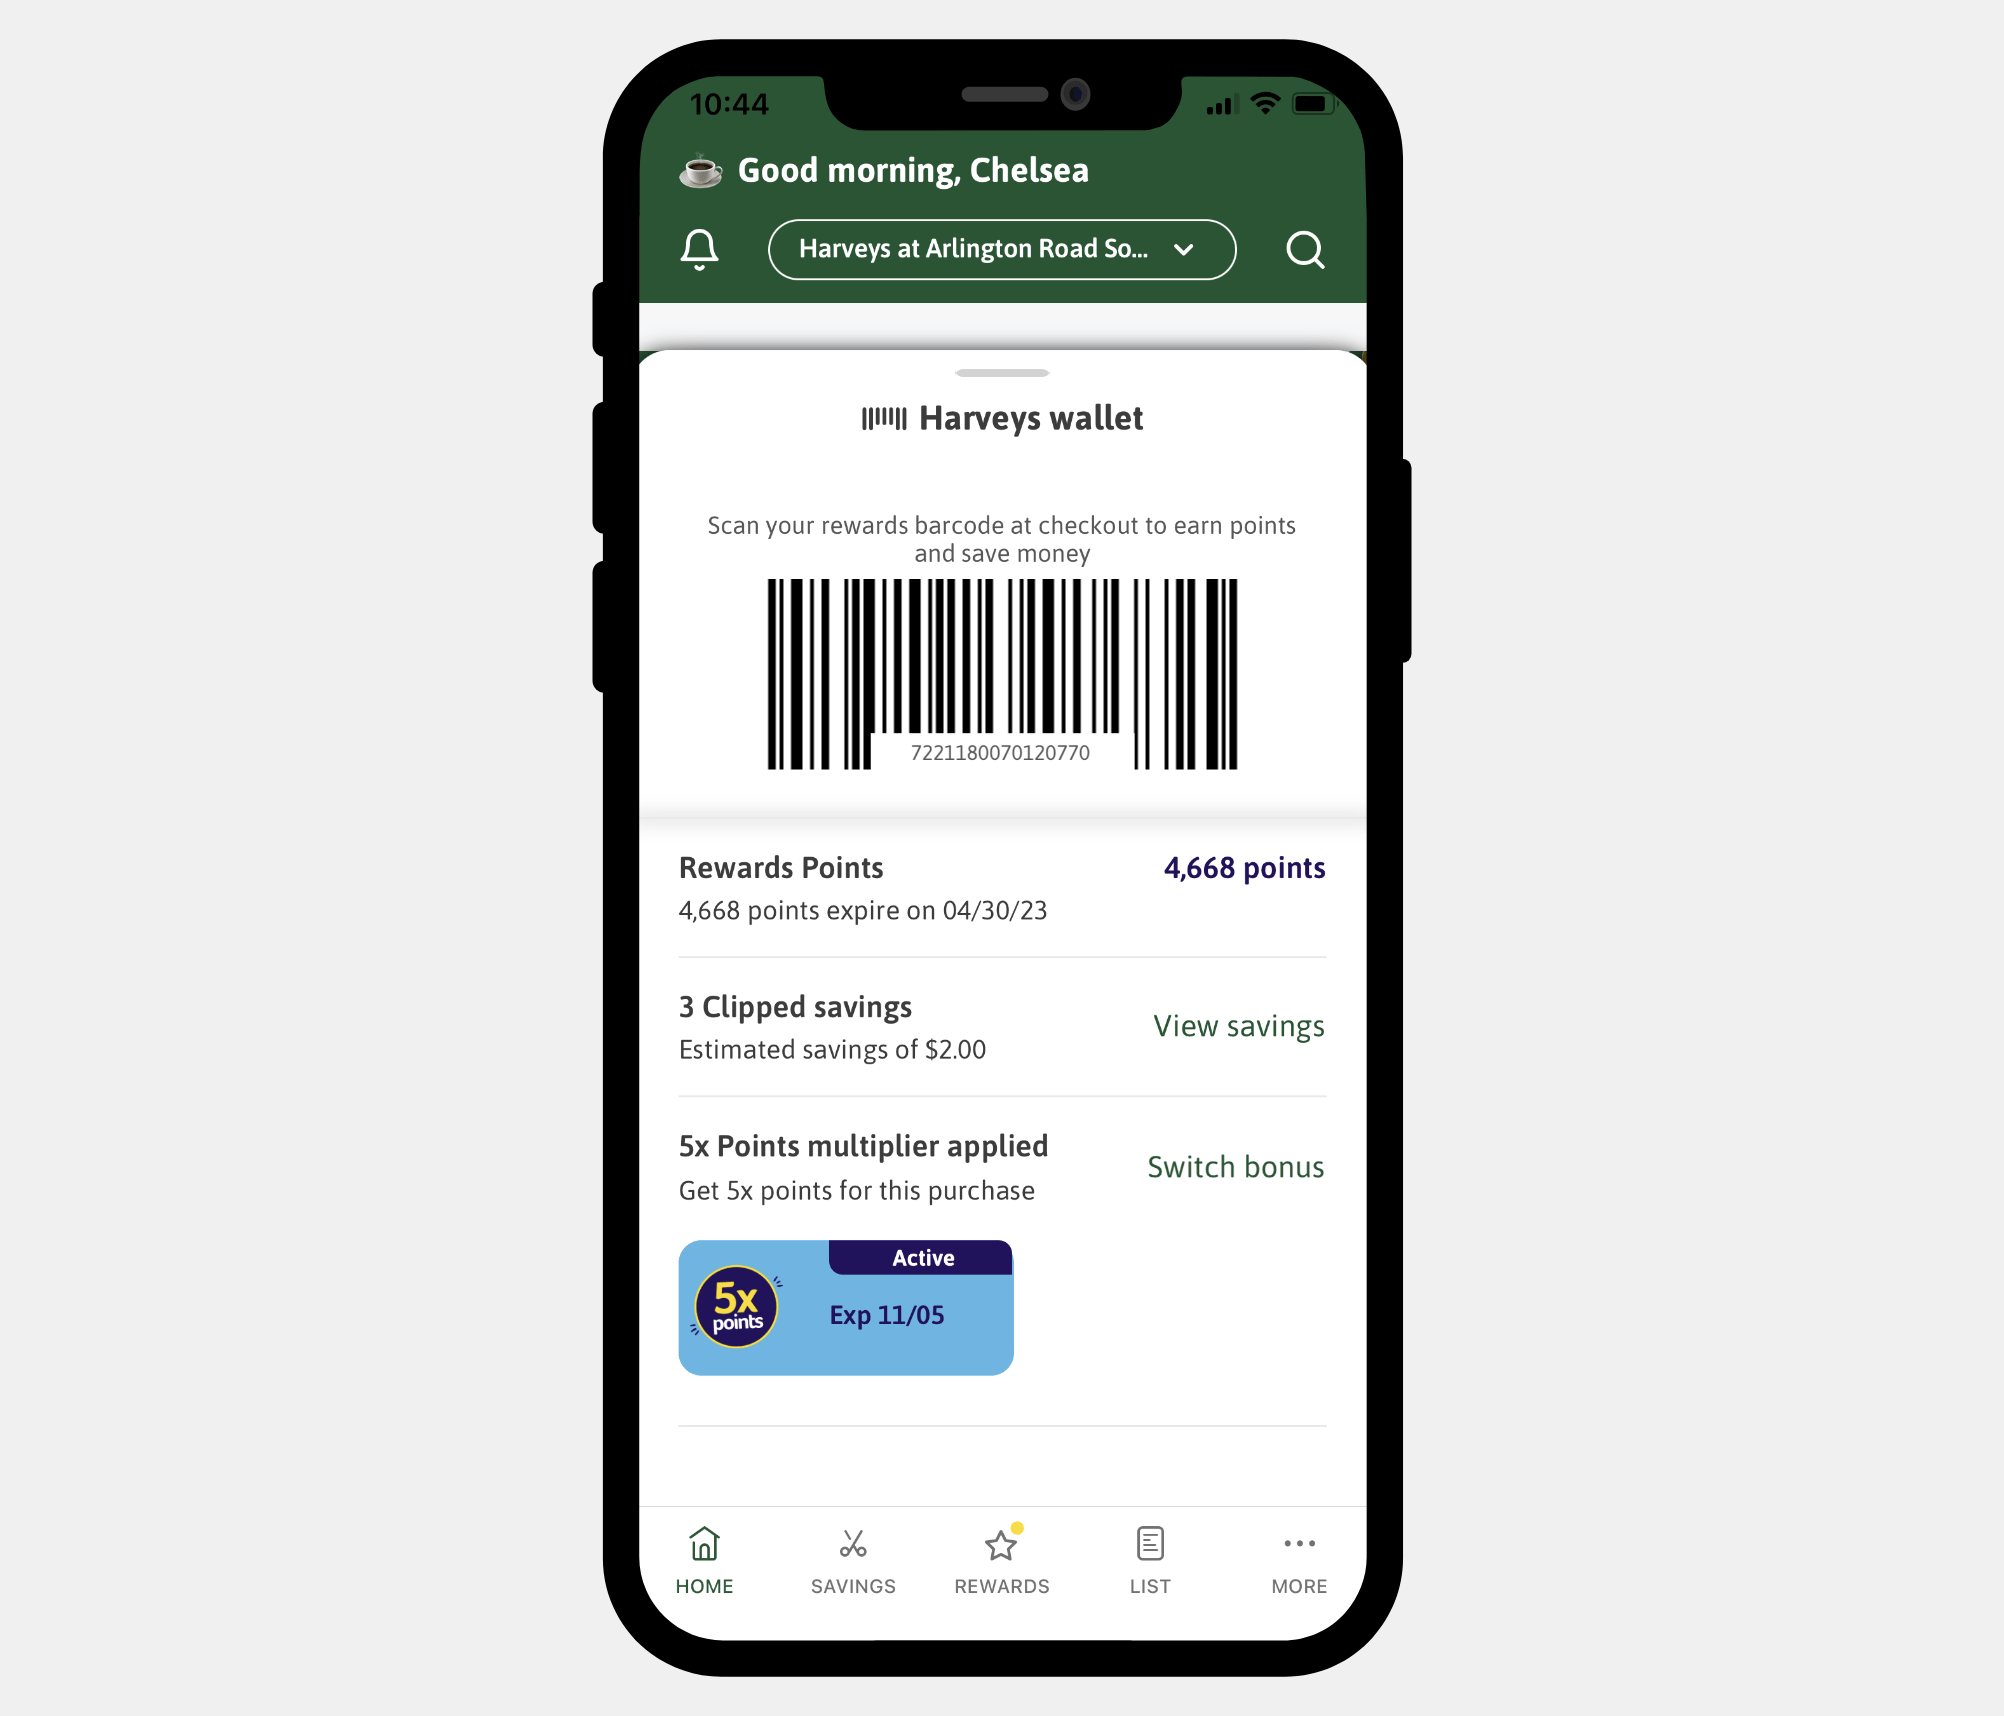 Image of a phone using the wallet feature on the Harveys app